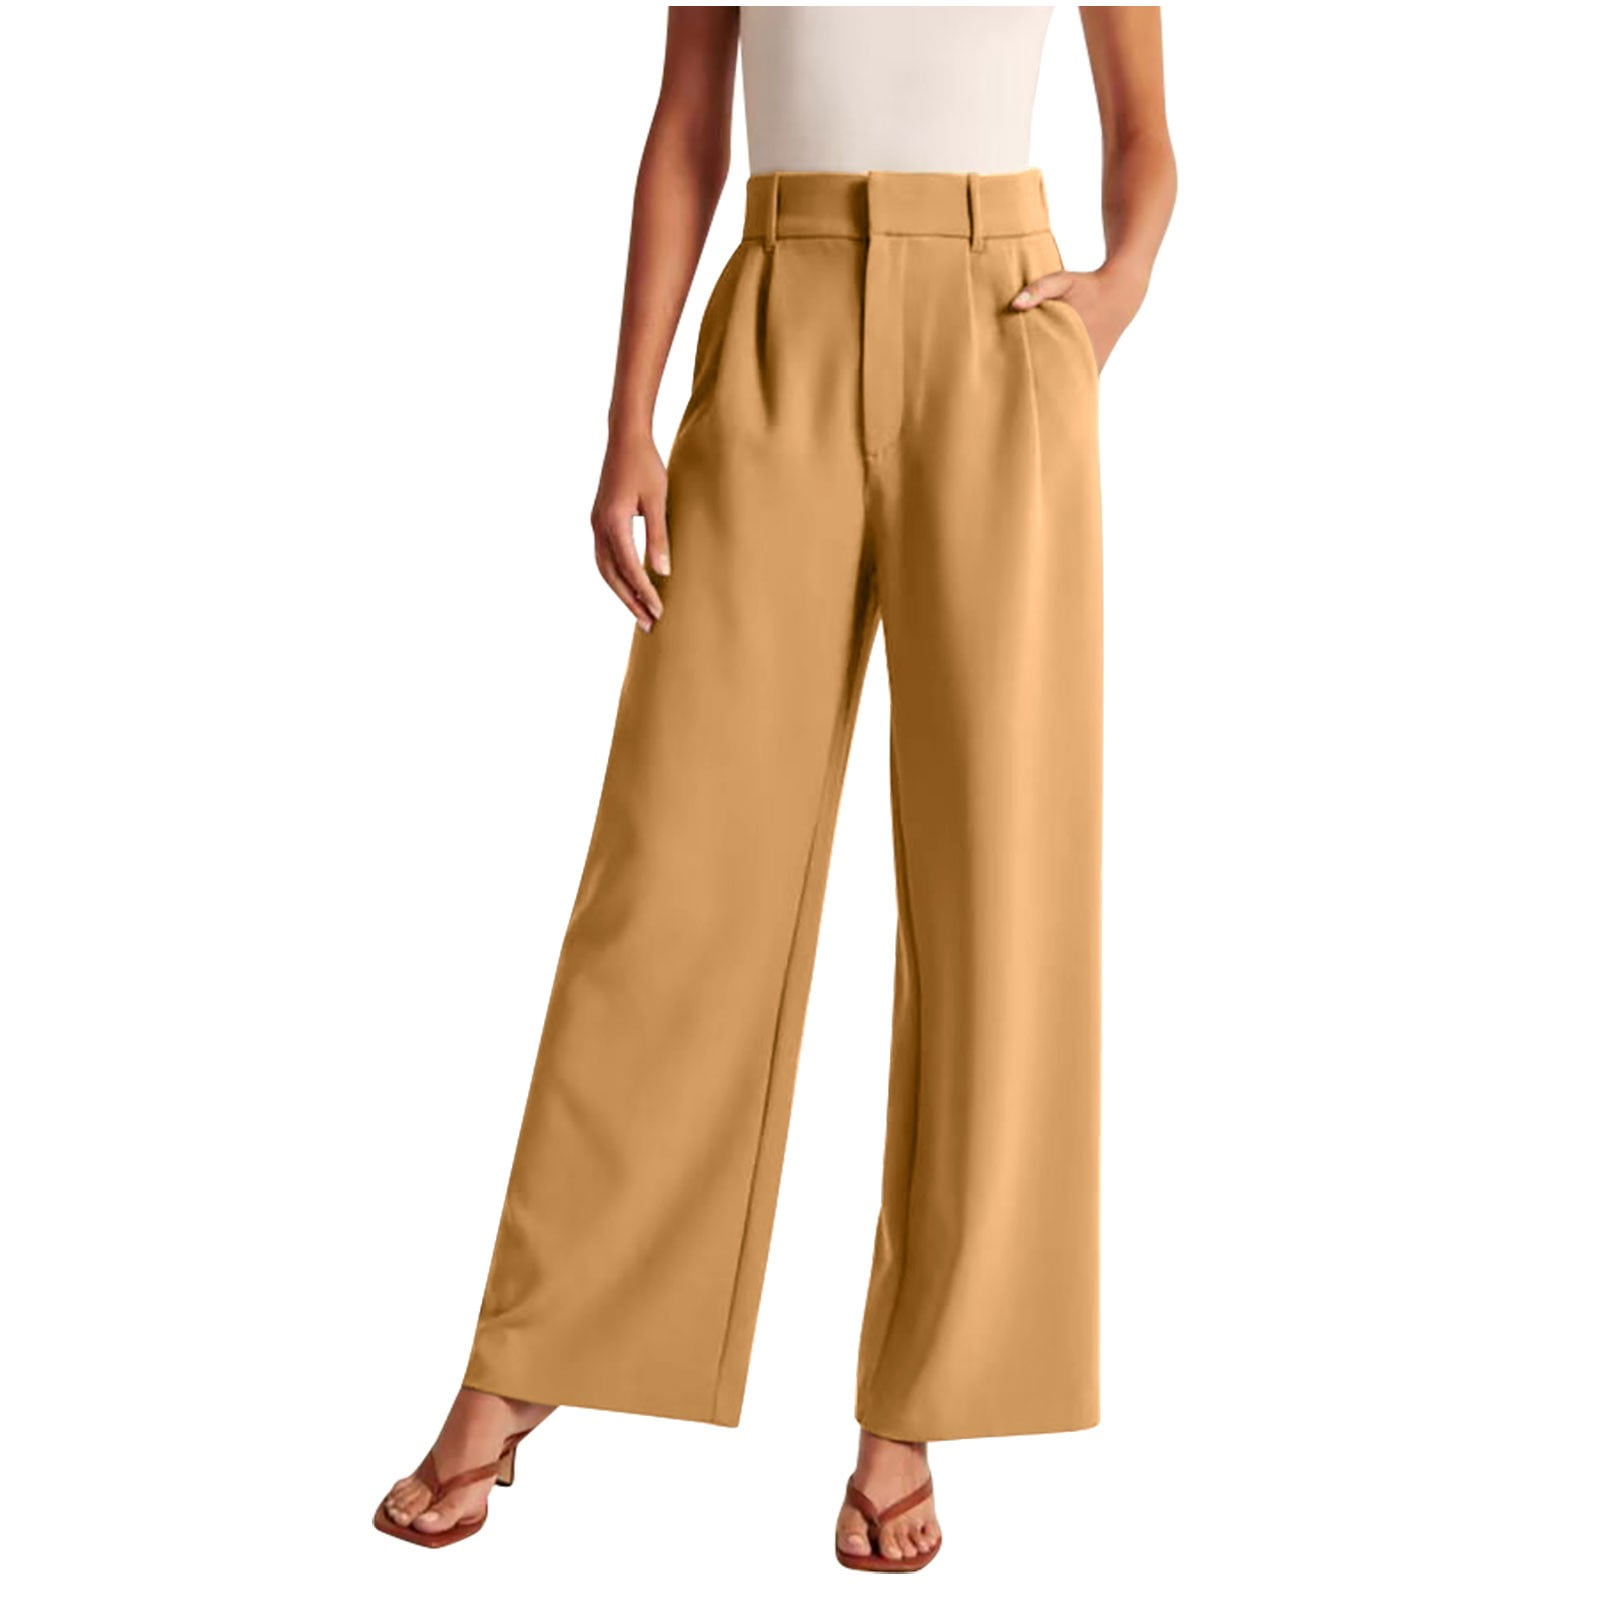 Wide Leg Pants for Women Work Business Casual High Waisted Dress Pants  Solid Baggy Flowy Office Trousers with Pockets